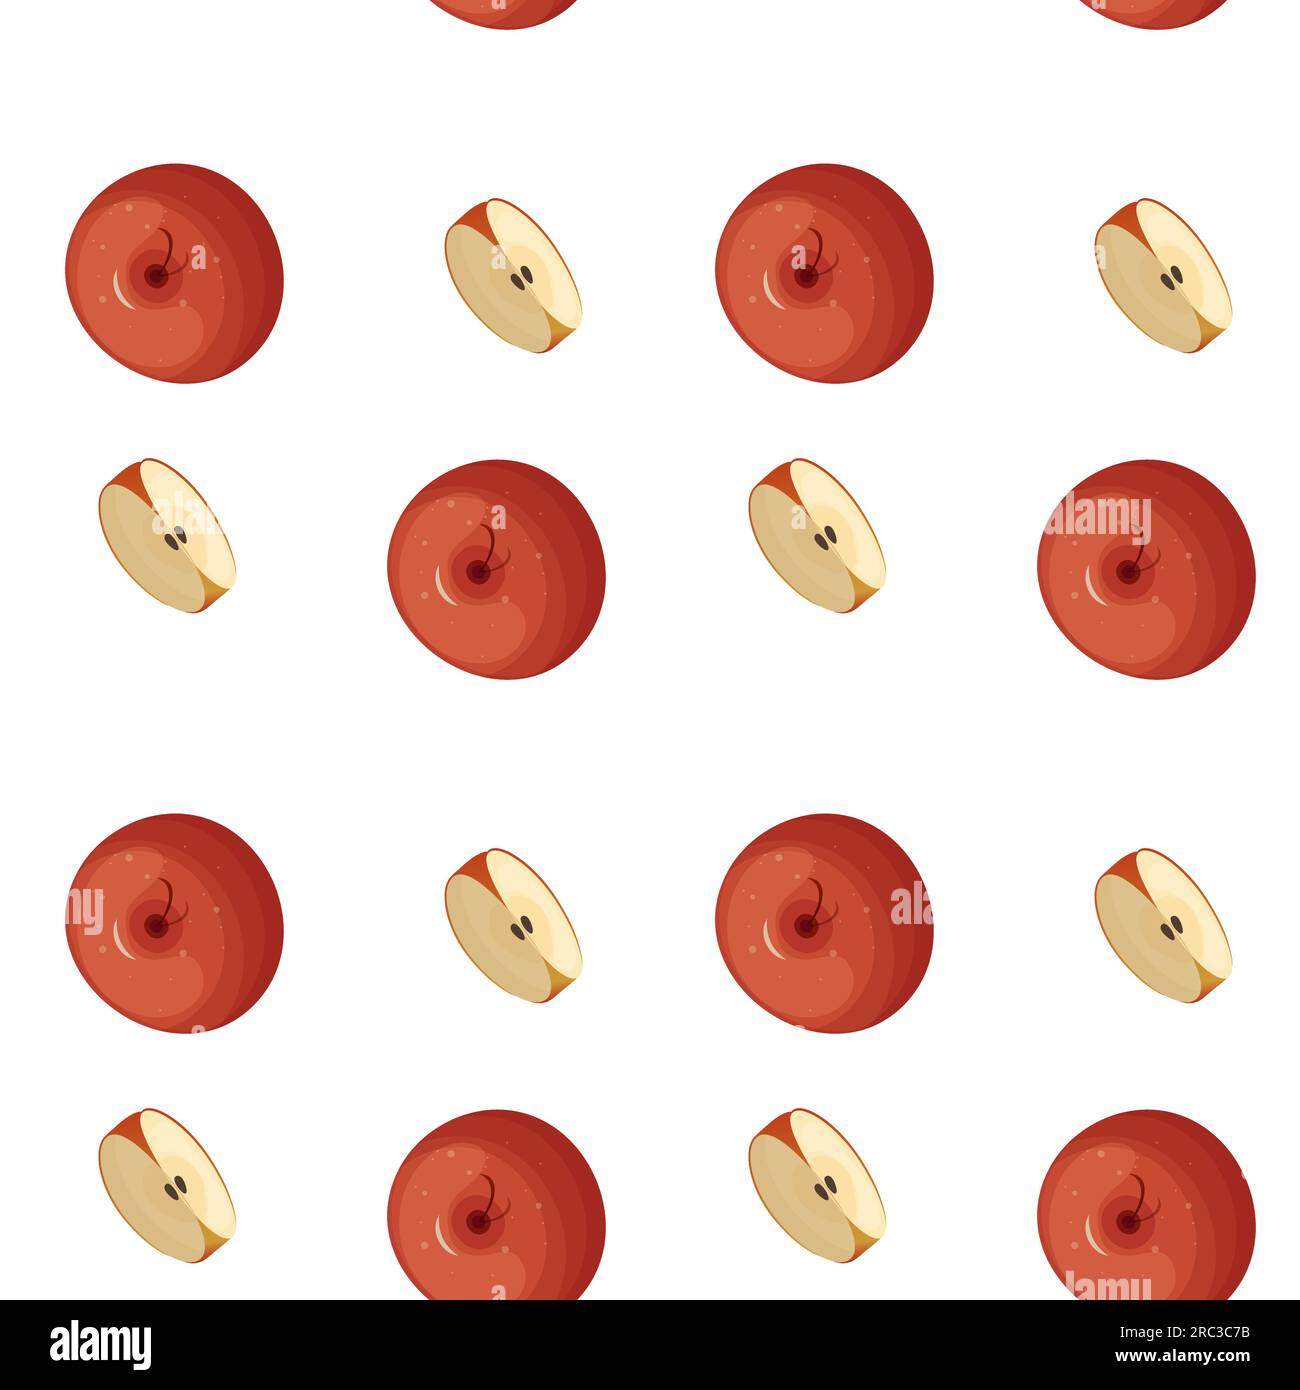 Seamless pattern of whole apples and apple slices.  Suitable for wallpapers, web page backgrounds, surface textures, textiles. Stock Vector